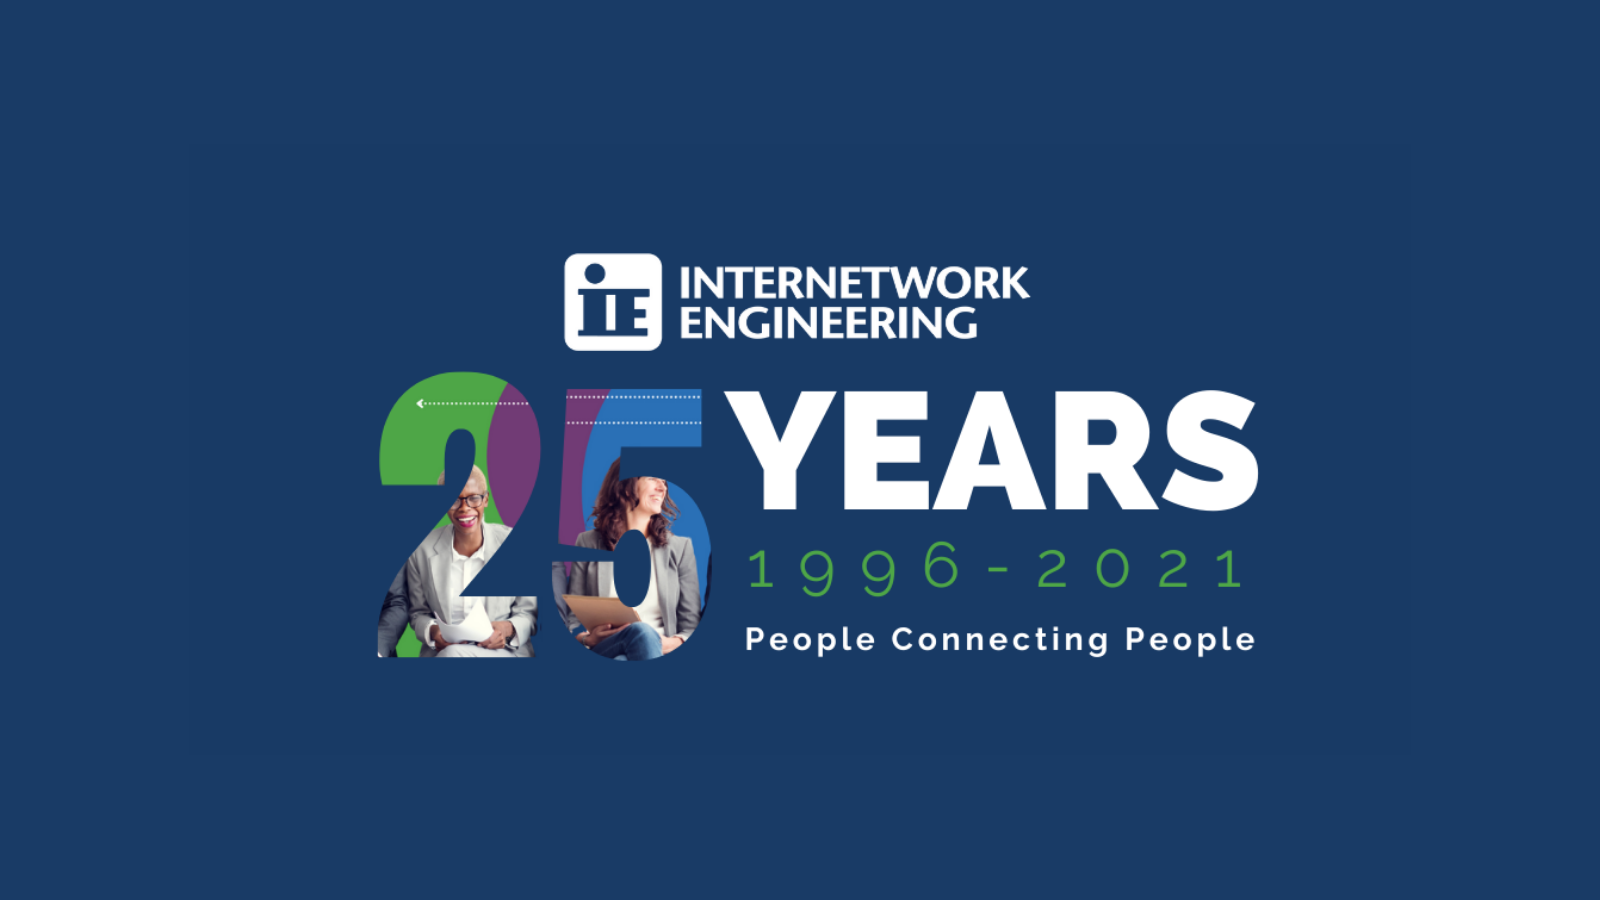 IE is Celebrating 25 Years of People Connecting People